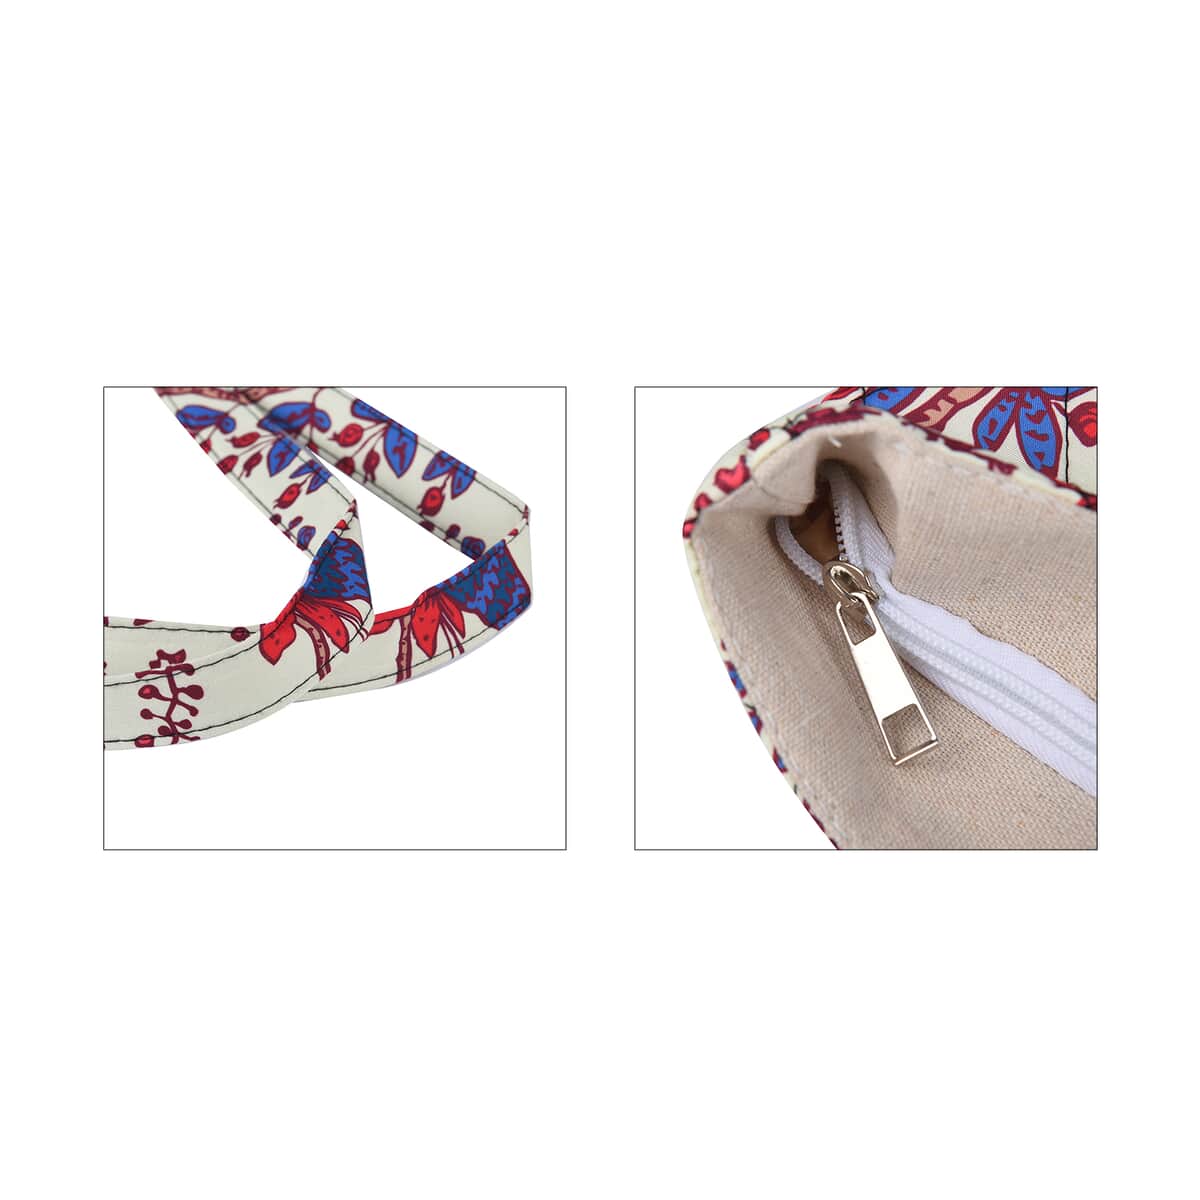 Beige and Mulit Color Flower Pattern Tote Bag (17"x4.5"x13.5") image number 4